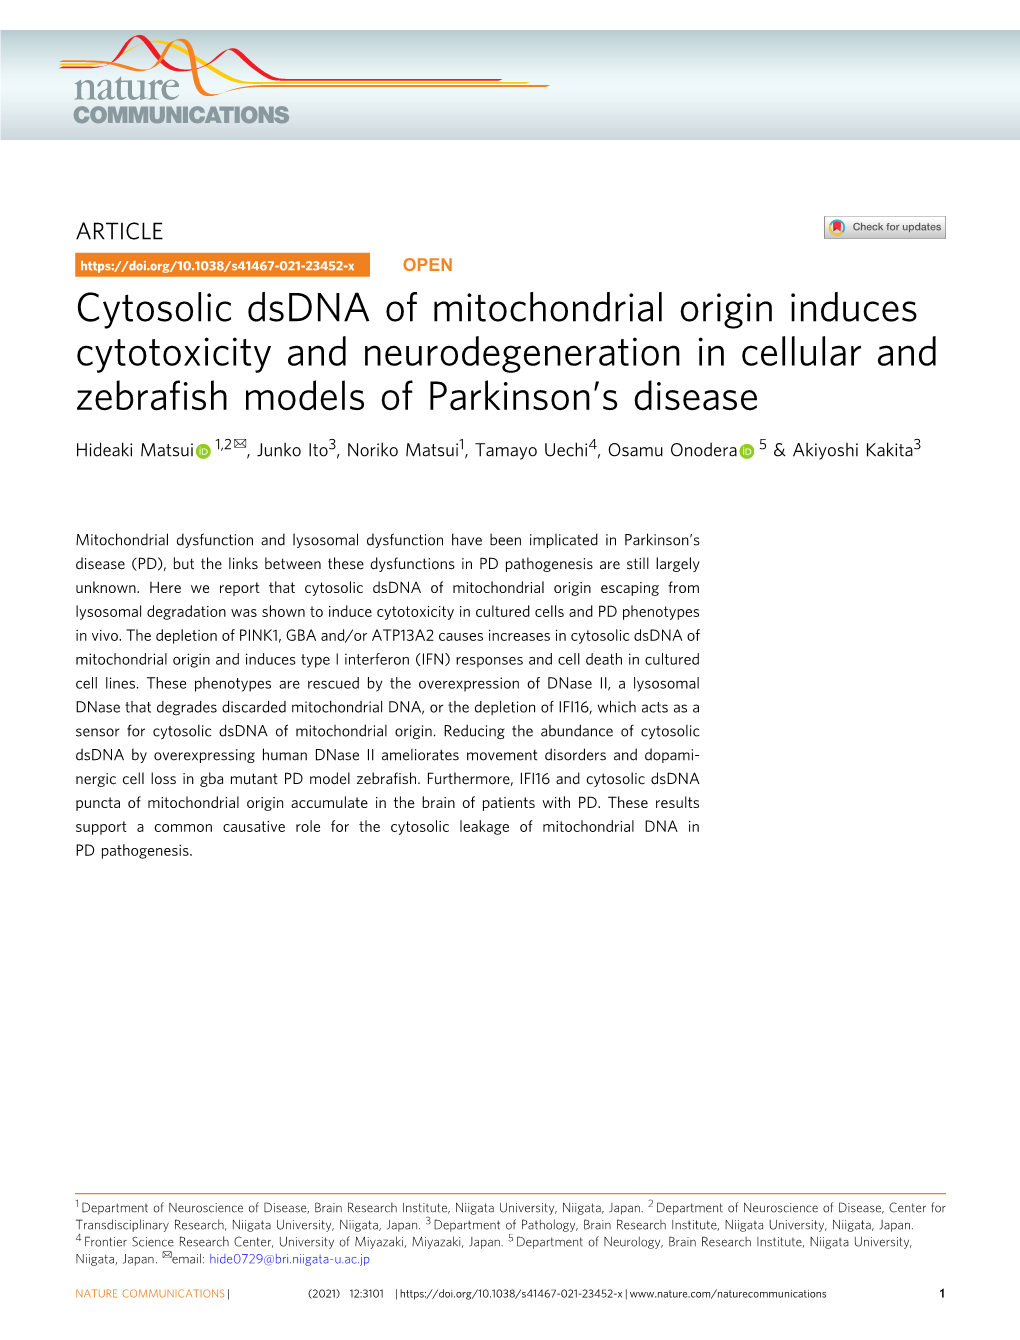 Cytosolic Dsdna of Mitochondrial Origin Induces Cytotoxicity And